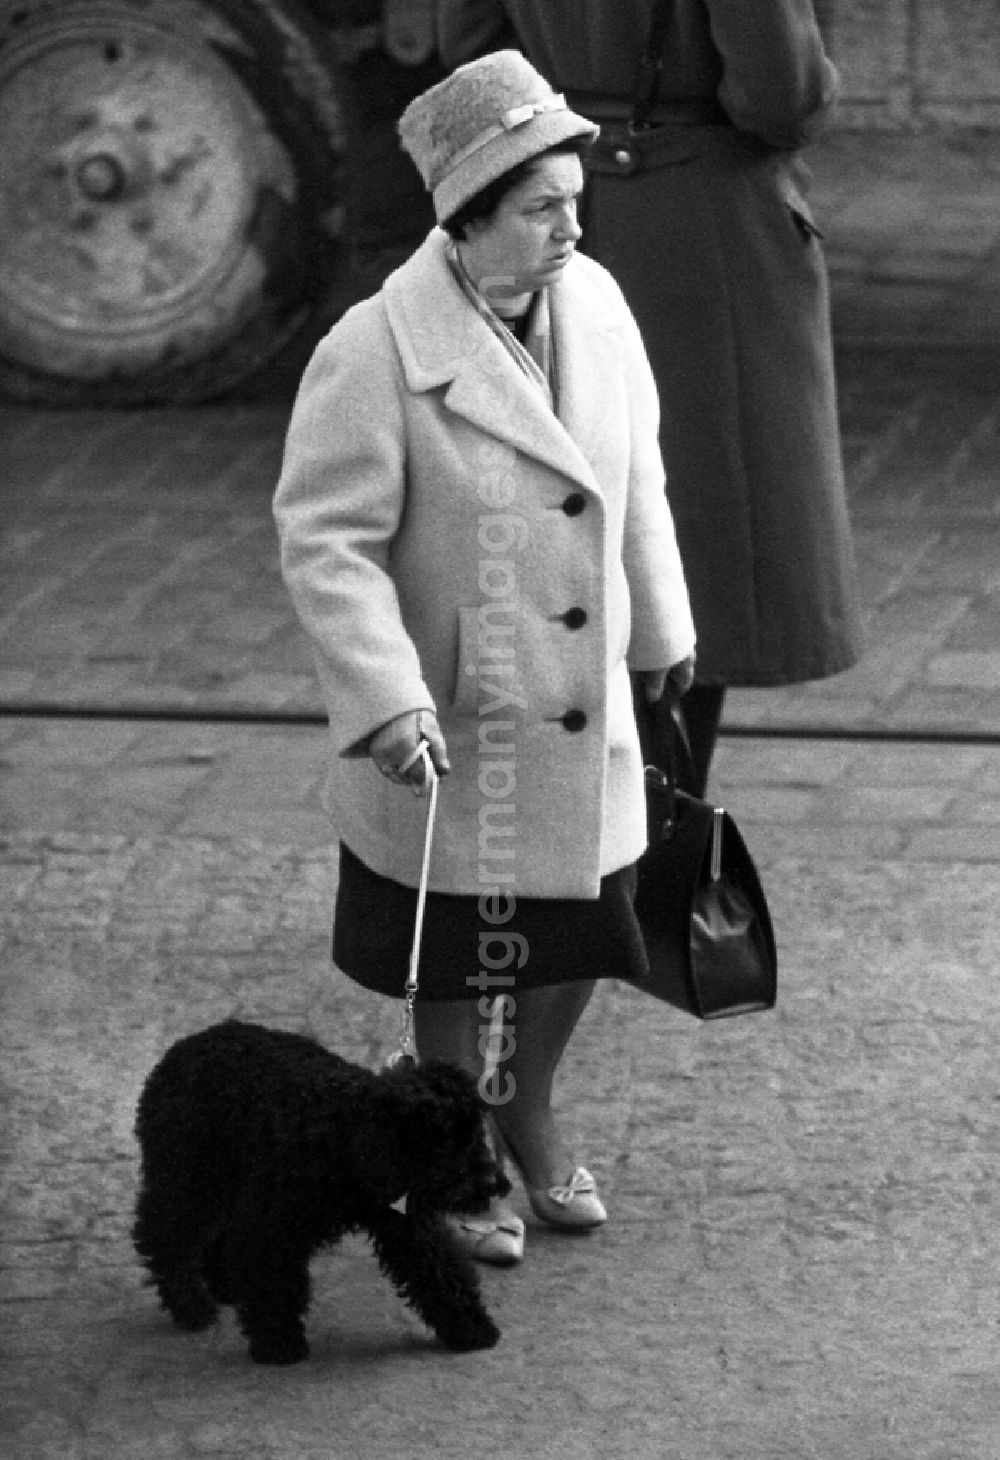 GDR picture archive: Berlin - Woman goes for a walk with her dog in Berlin in the area of the former GDR, German Democratic Republic